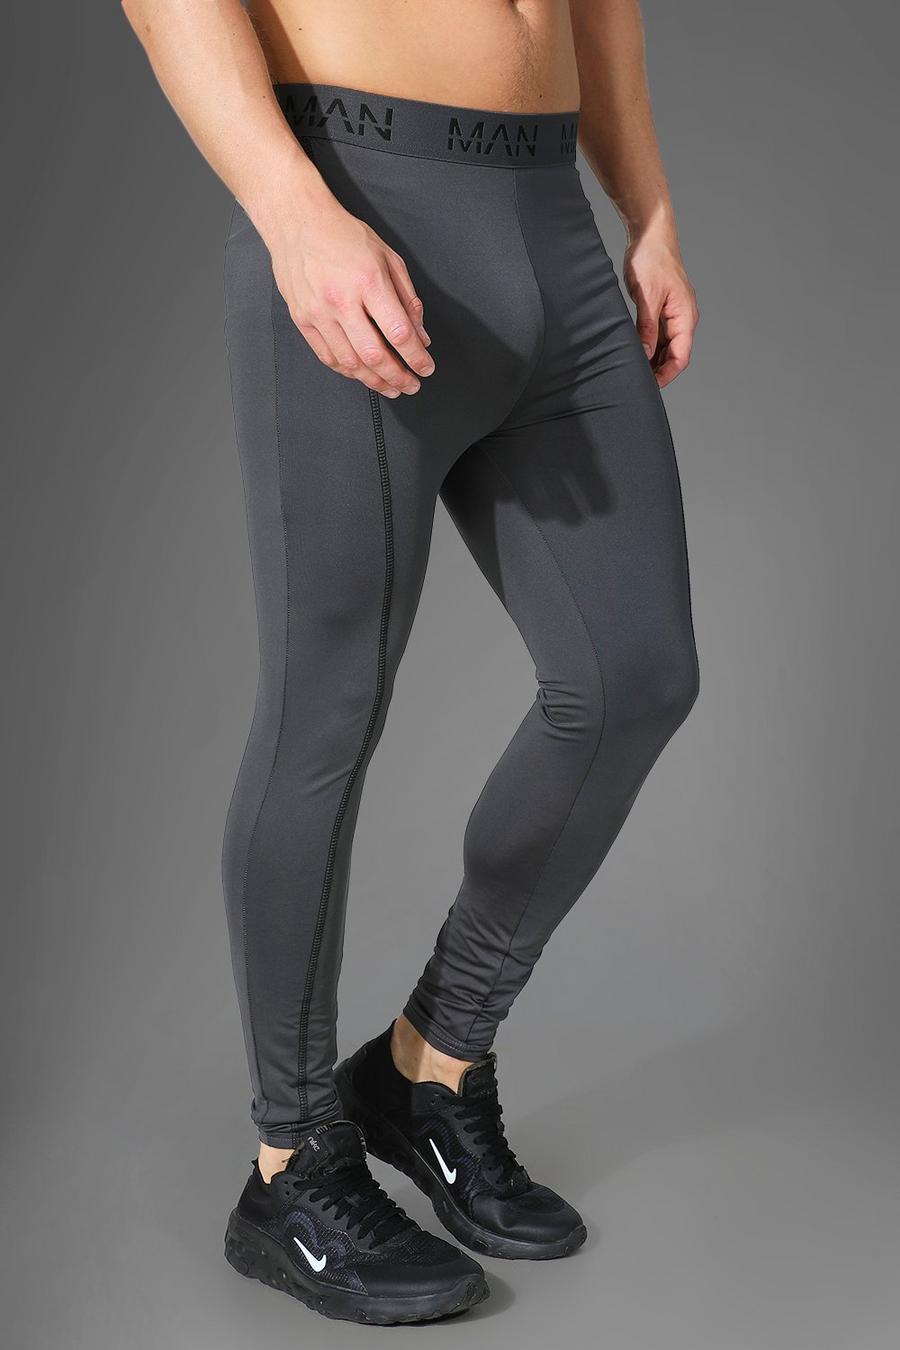 Legging Man Active Gym a compressione a contrasto, Charcoal grey image number 1